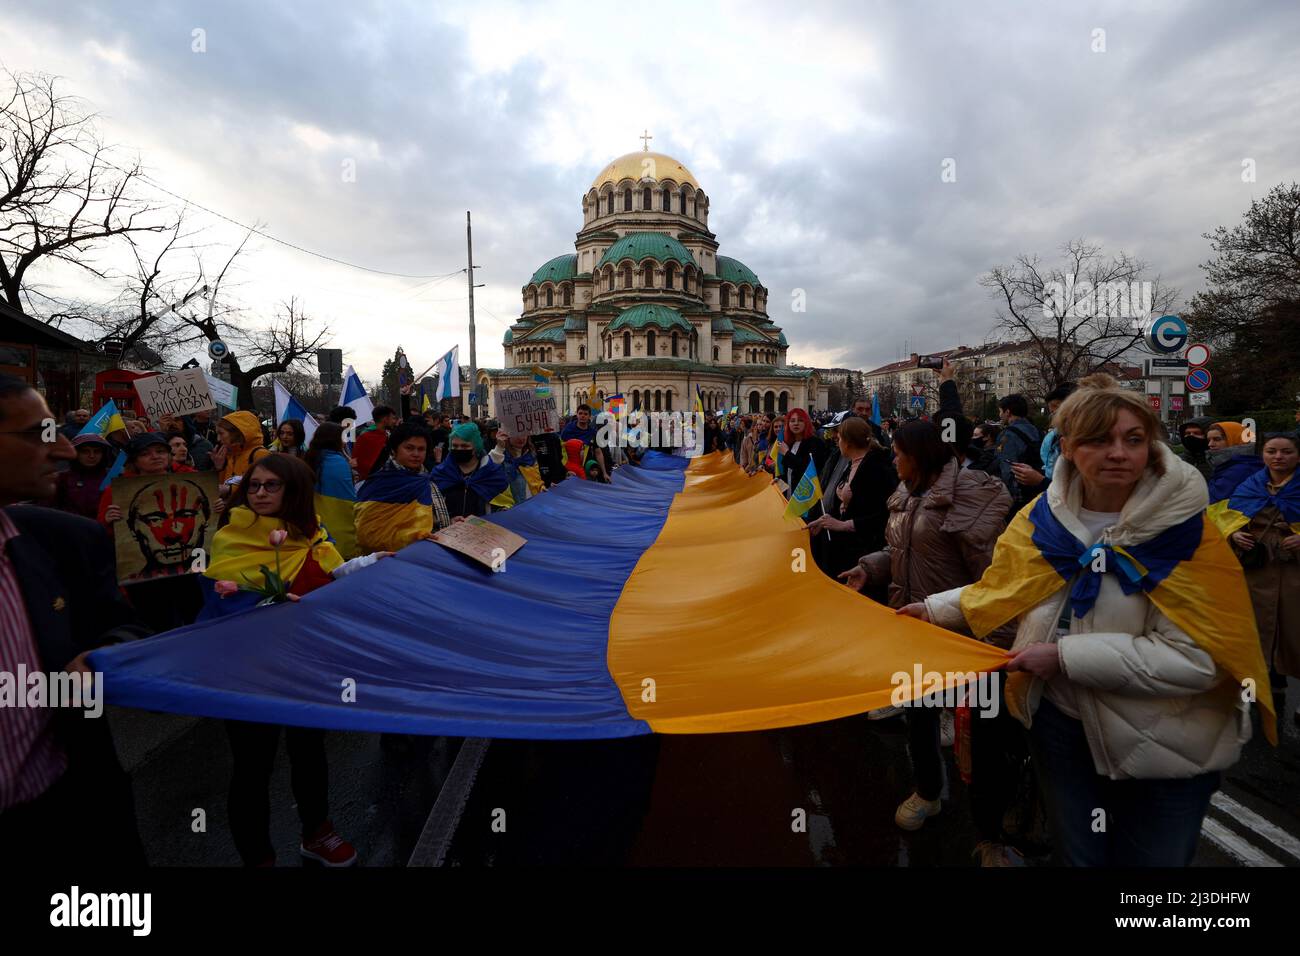 Sofia, Bulgaria - 7 April, 2022: People demonstrate holding Ukraine's national flag during a march in support of Ukraine. On 24th of February Russian army entered Ukrainian territory in what the Russian president Vladimir Putin declared a 'special military operation'. Stock Photo